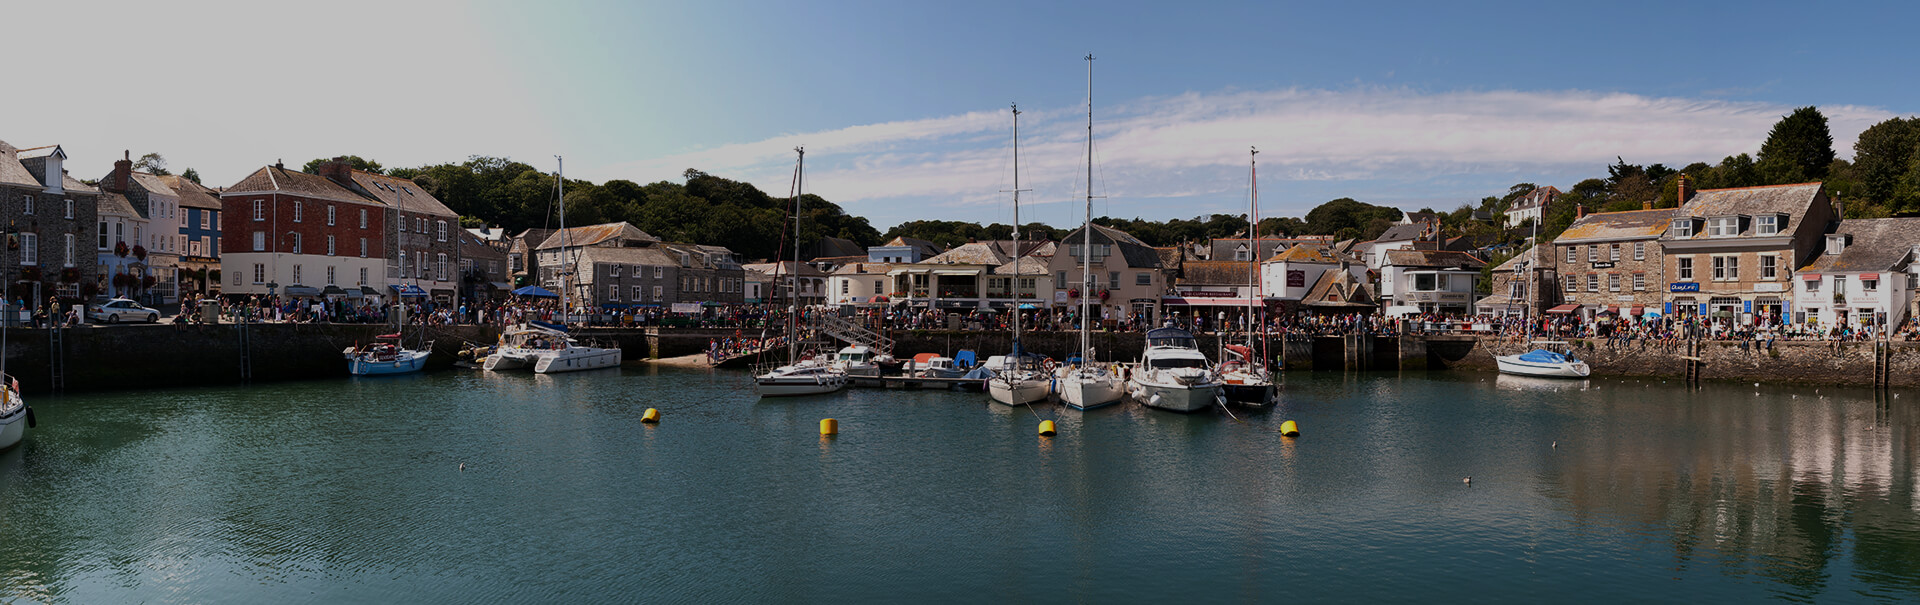 Self Catering Holiday In Padstow Cornwall